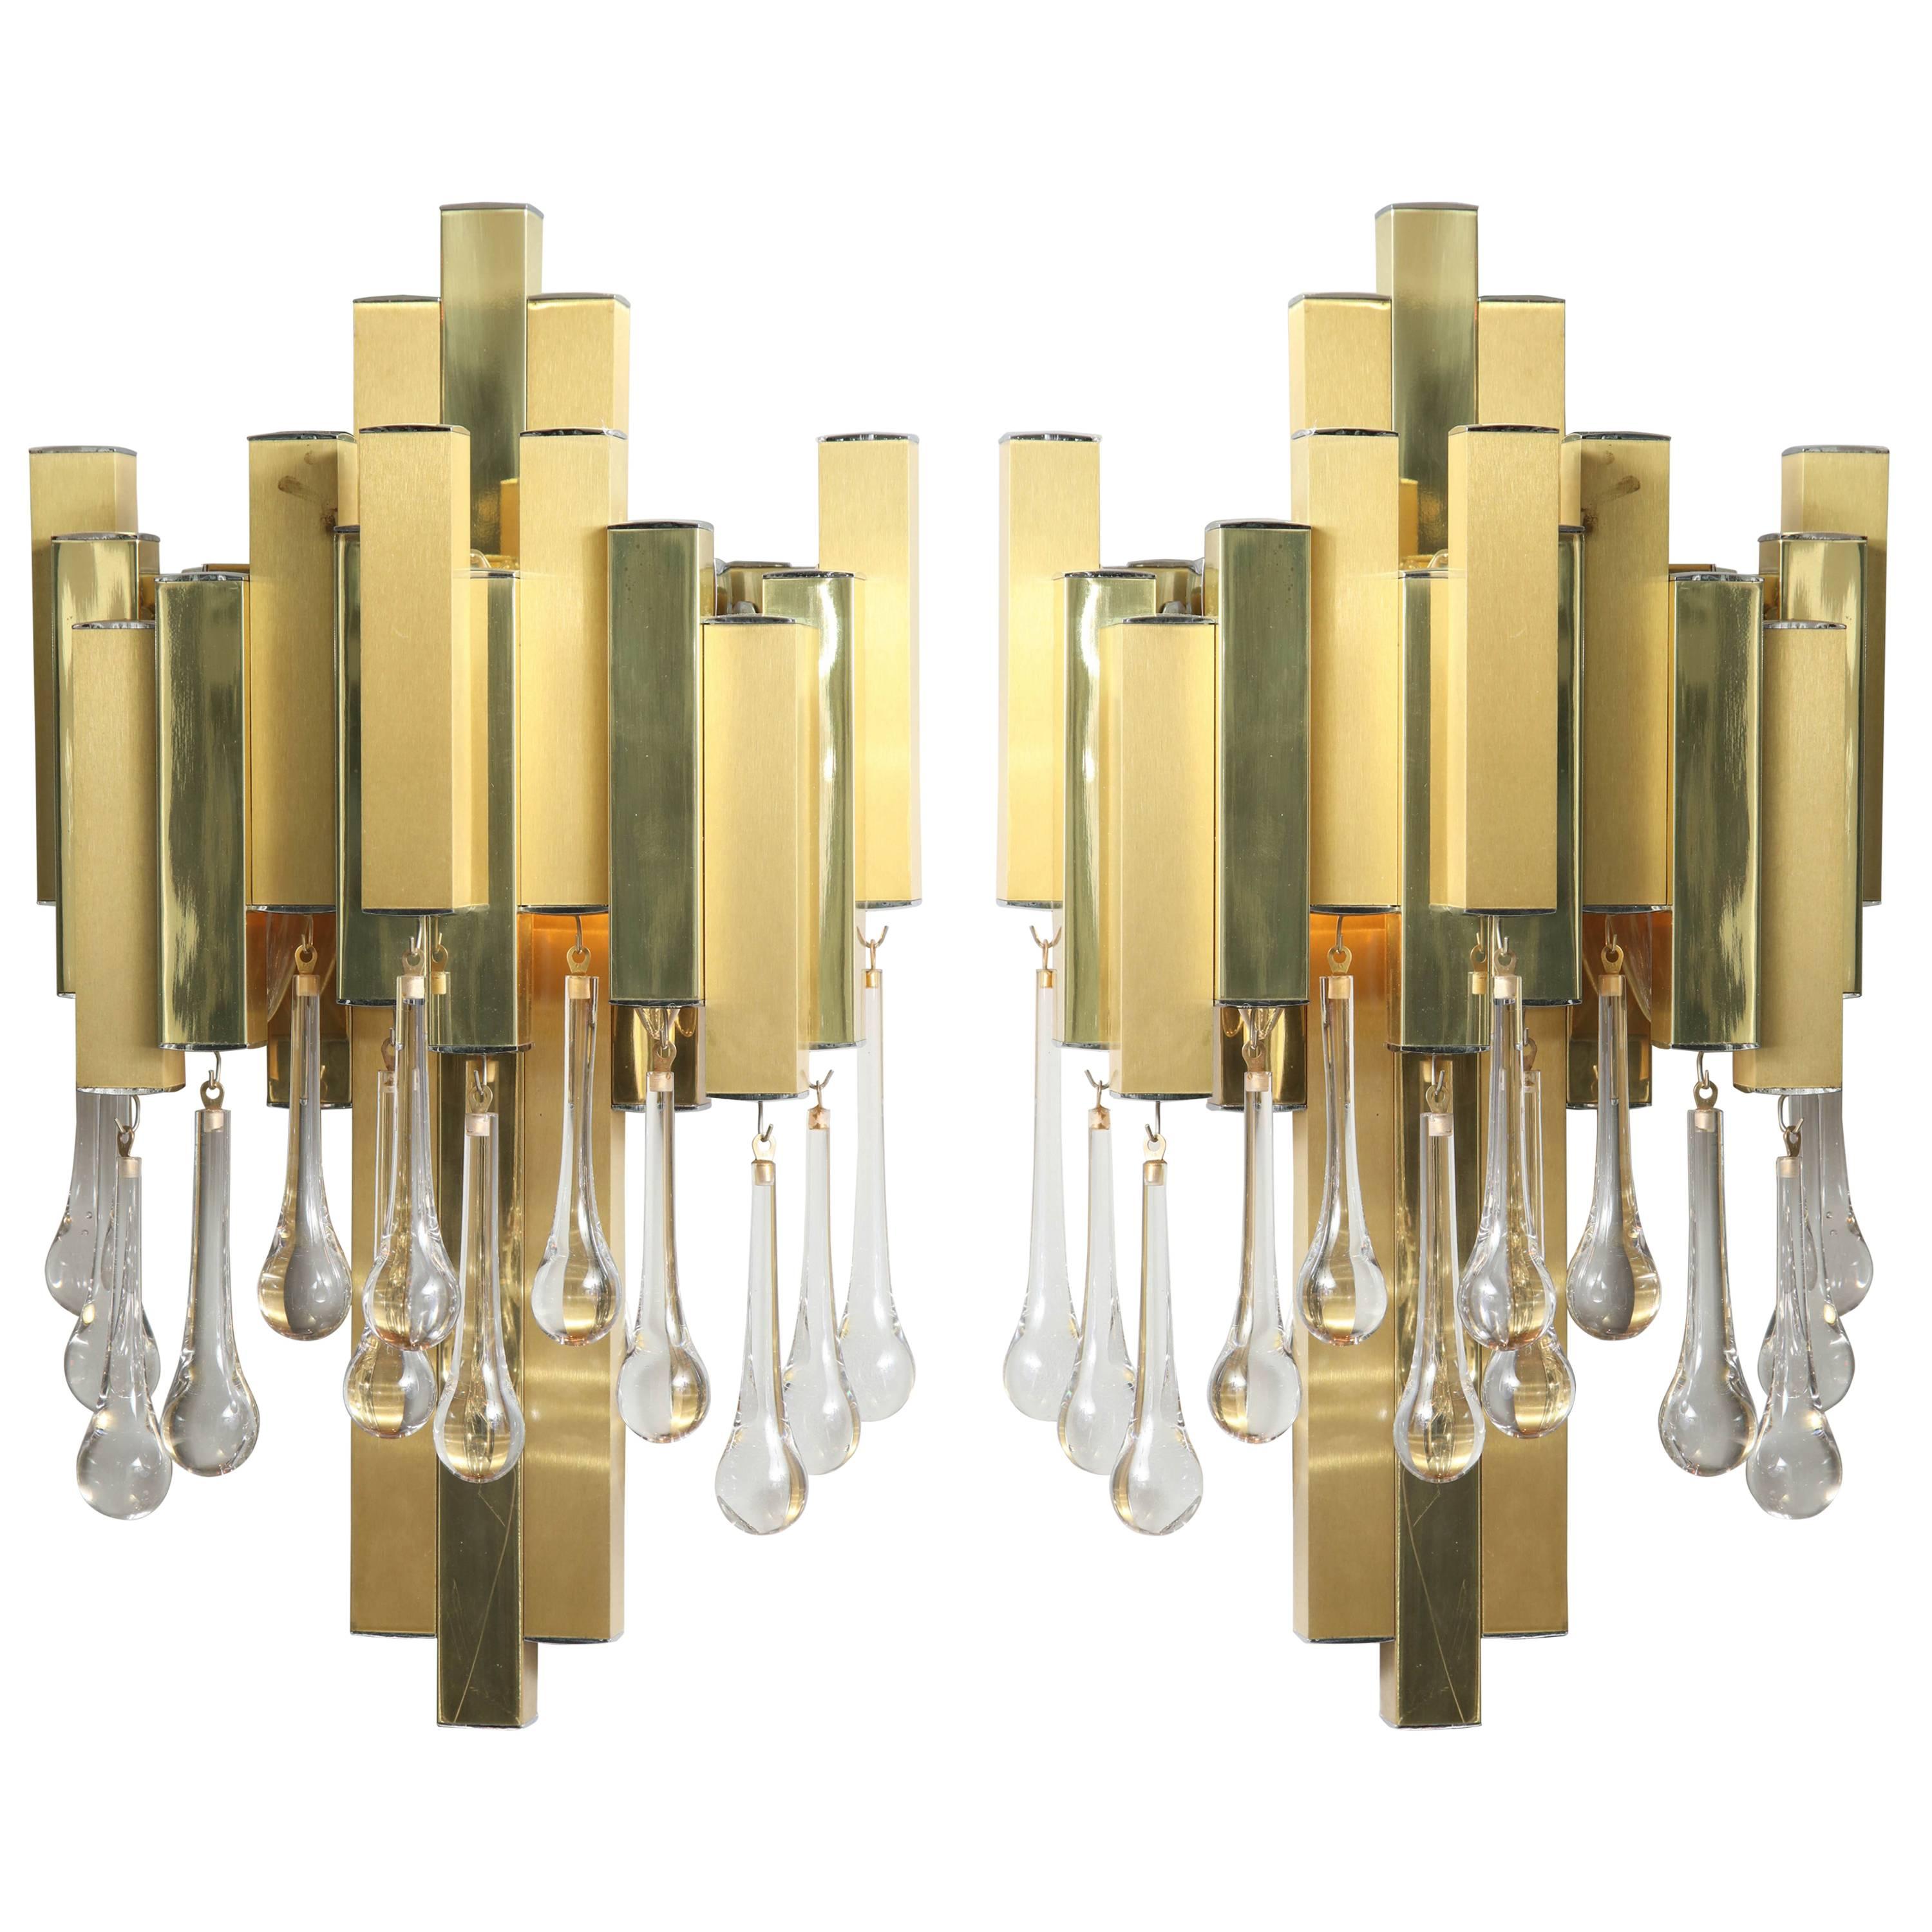 Willy Rizzo for BD Lumica Pair of Brutalist Sconces with Glass Tear Drops